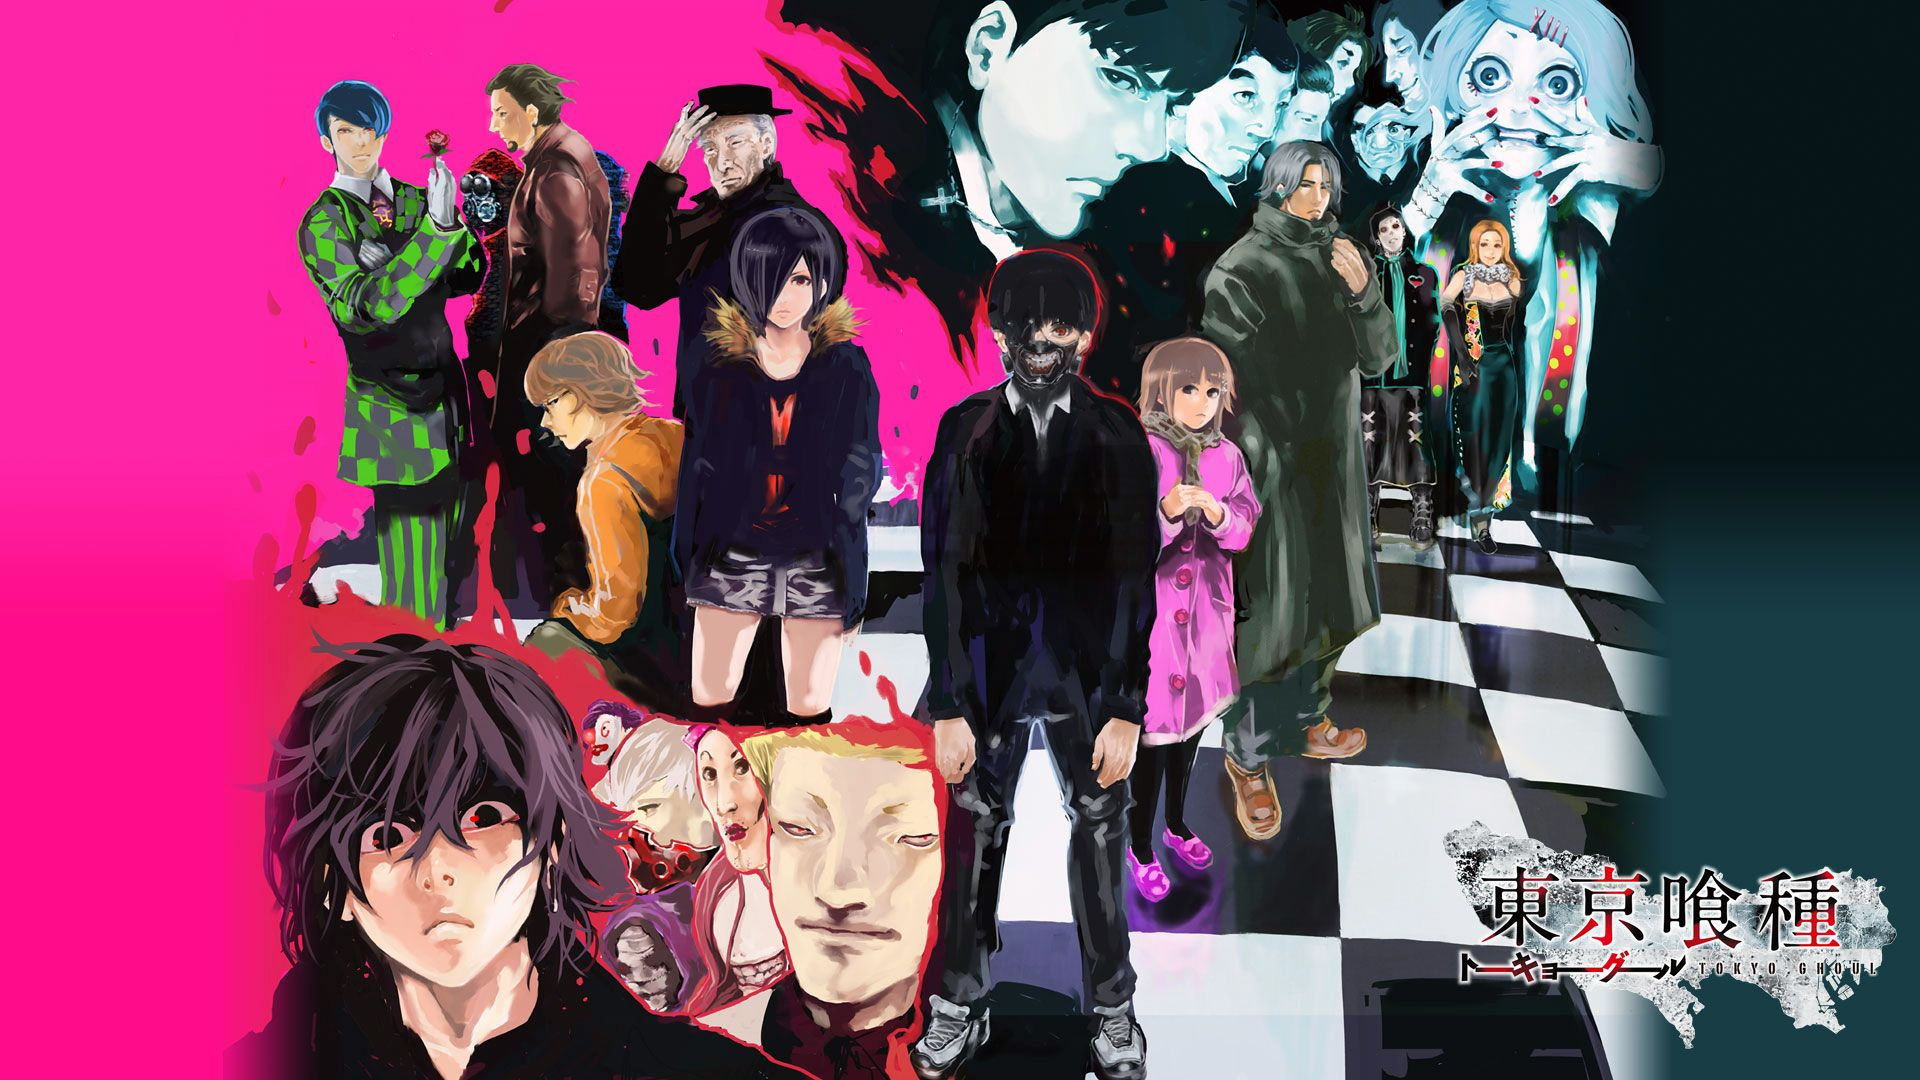 1920x1080 Read Manga Online for Free | Tokyo ghoul wallpapers, Tokyo ghoul manga, Chibi tokyo ghoul